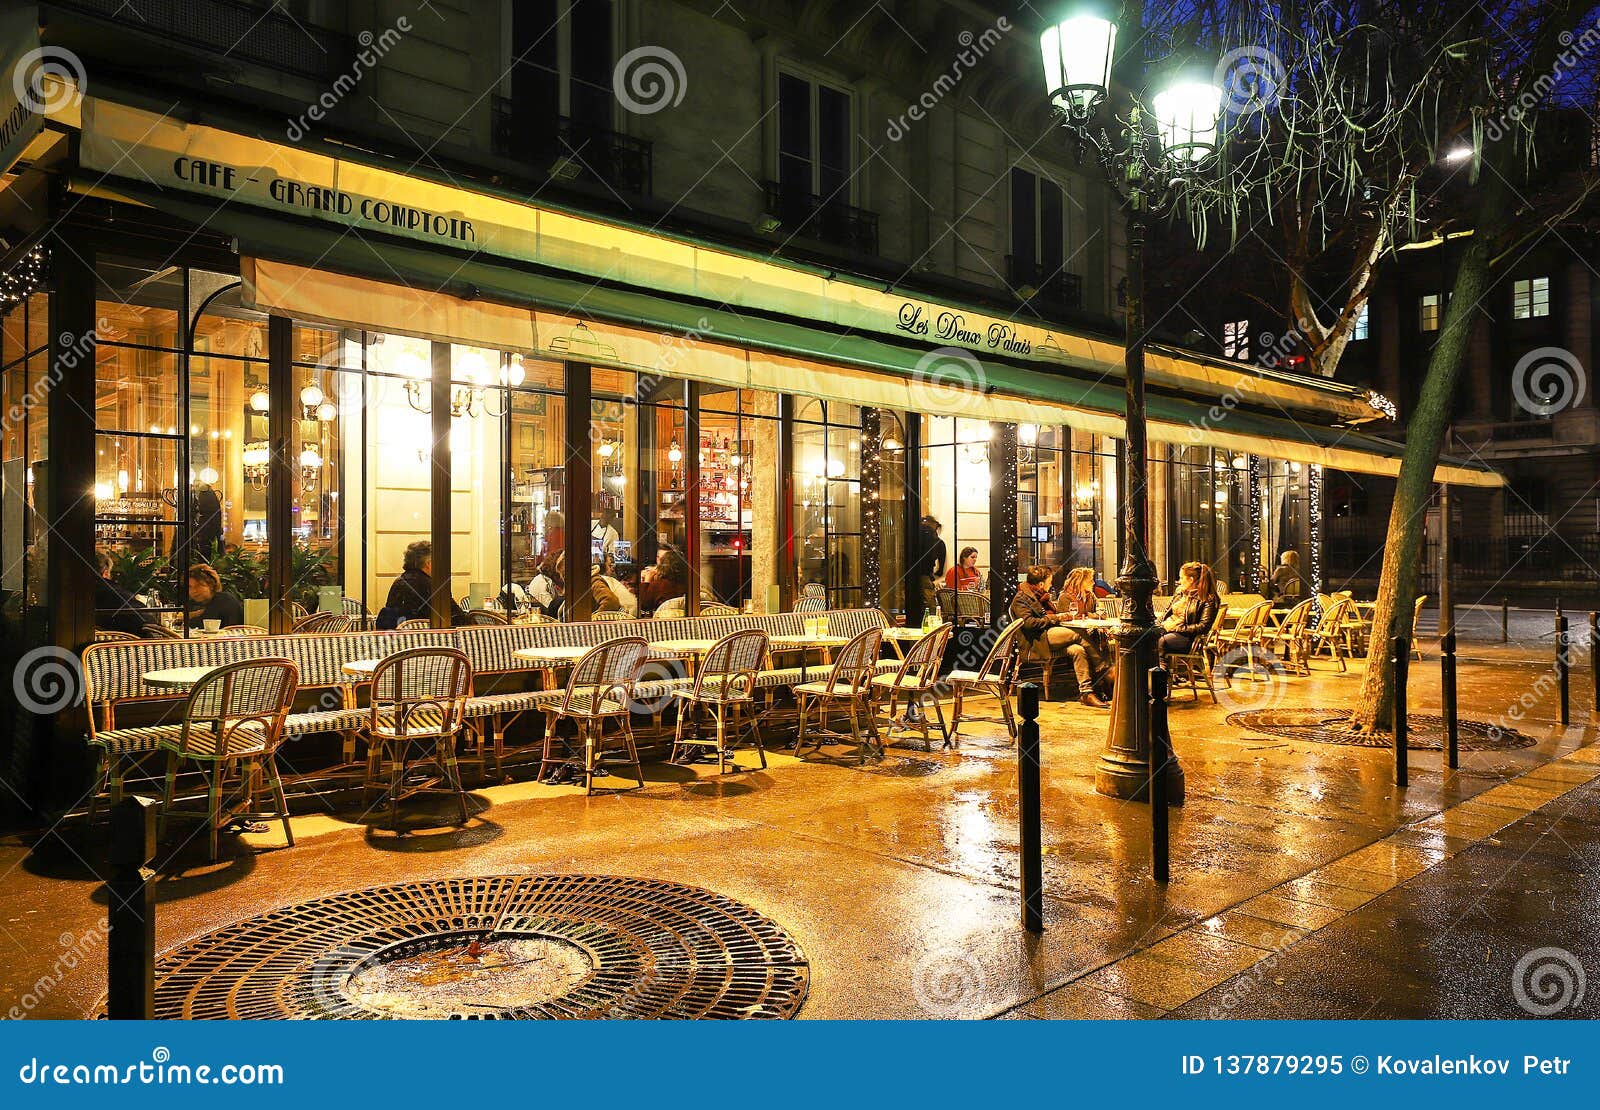 The Traditional French Cafe Deux Palais At Rainy Night It